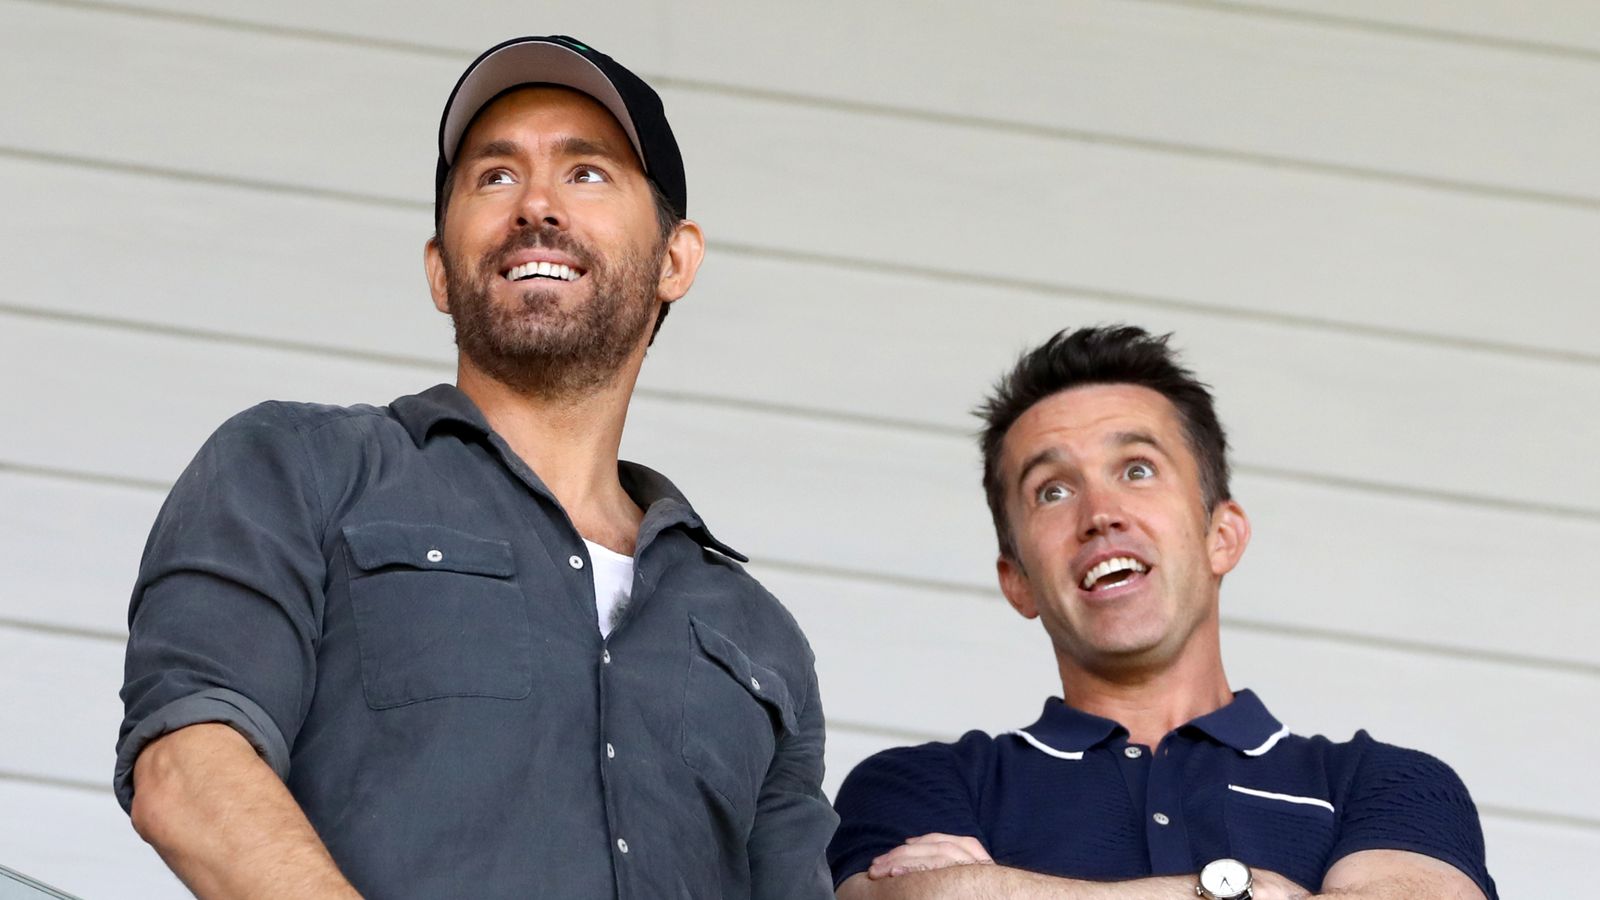 'This is the ride of our lives': Ryan Reynolds and Rob McElhenney celebrate Wrexham promotion